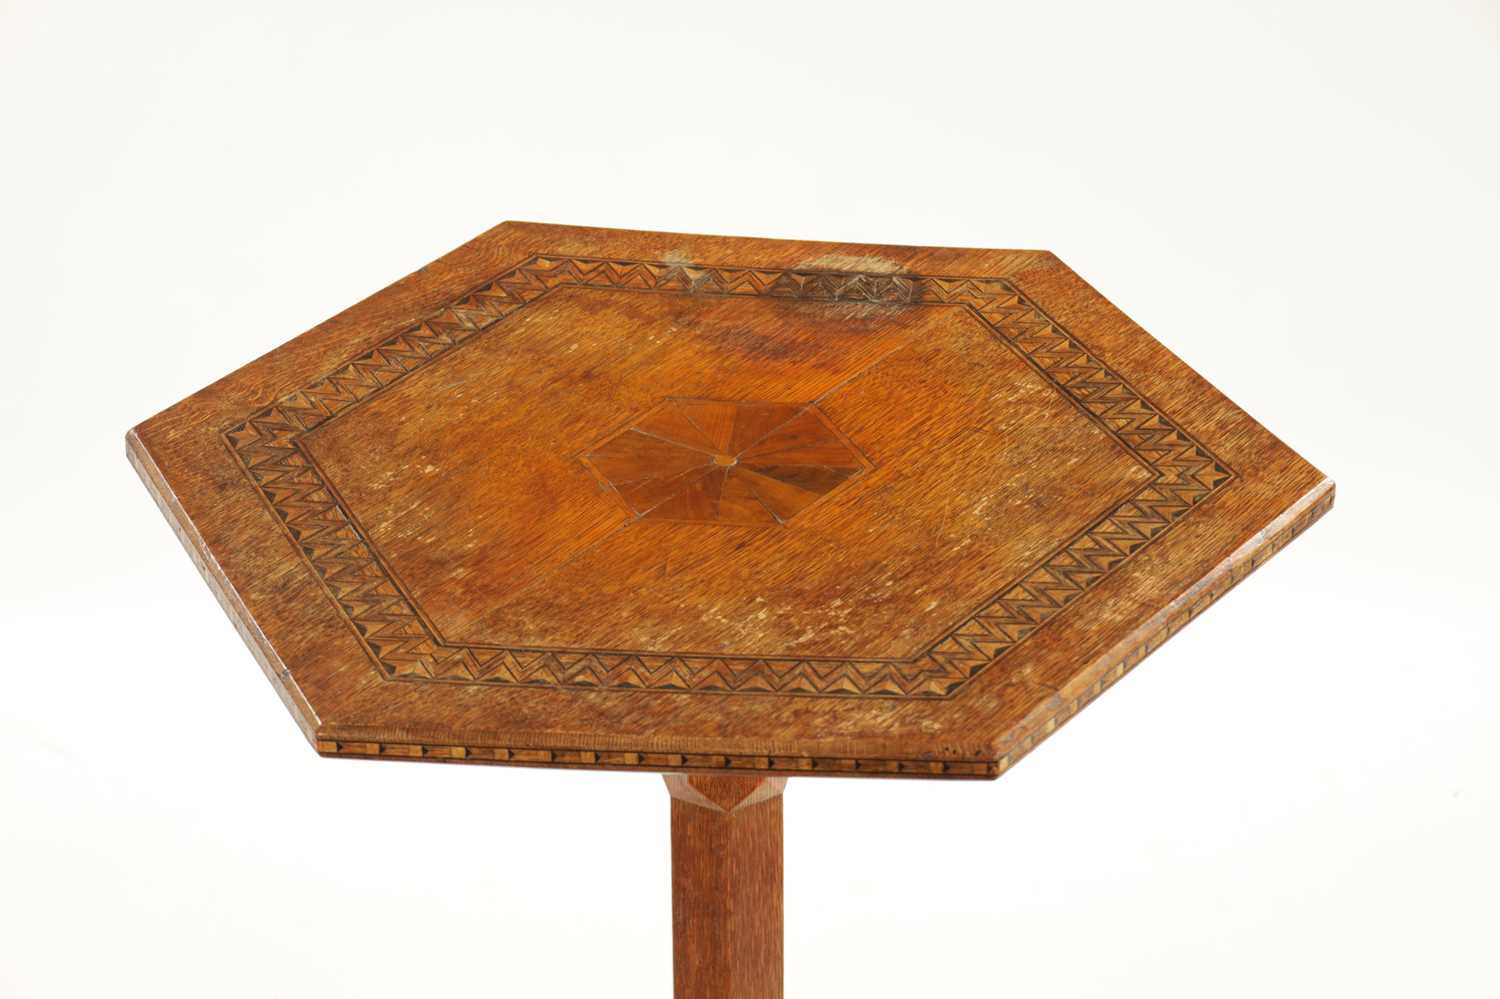 AN EARLY 20TH CENTURY AESTHETIC PERIOD OCTAGONAL PUGINESQUE INLAID OAK OCCASIONAL TABLE - Image 2 of 6